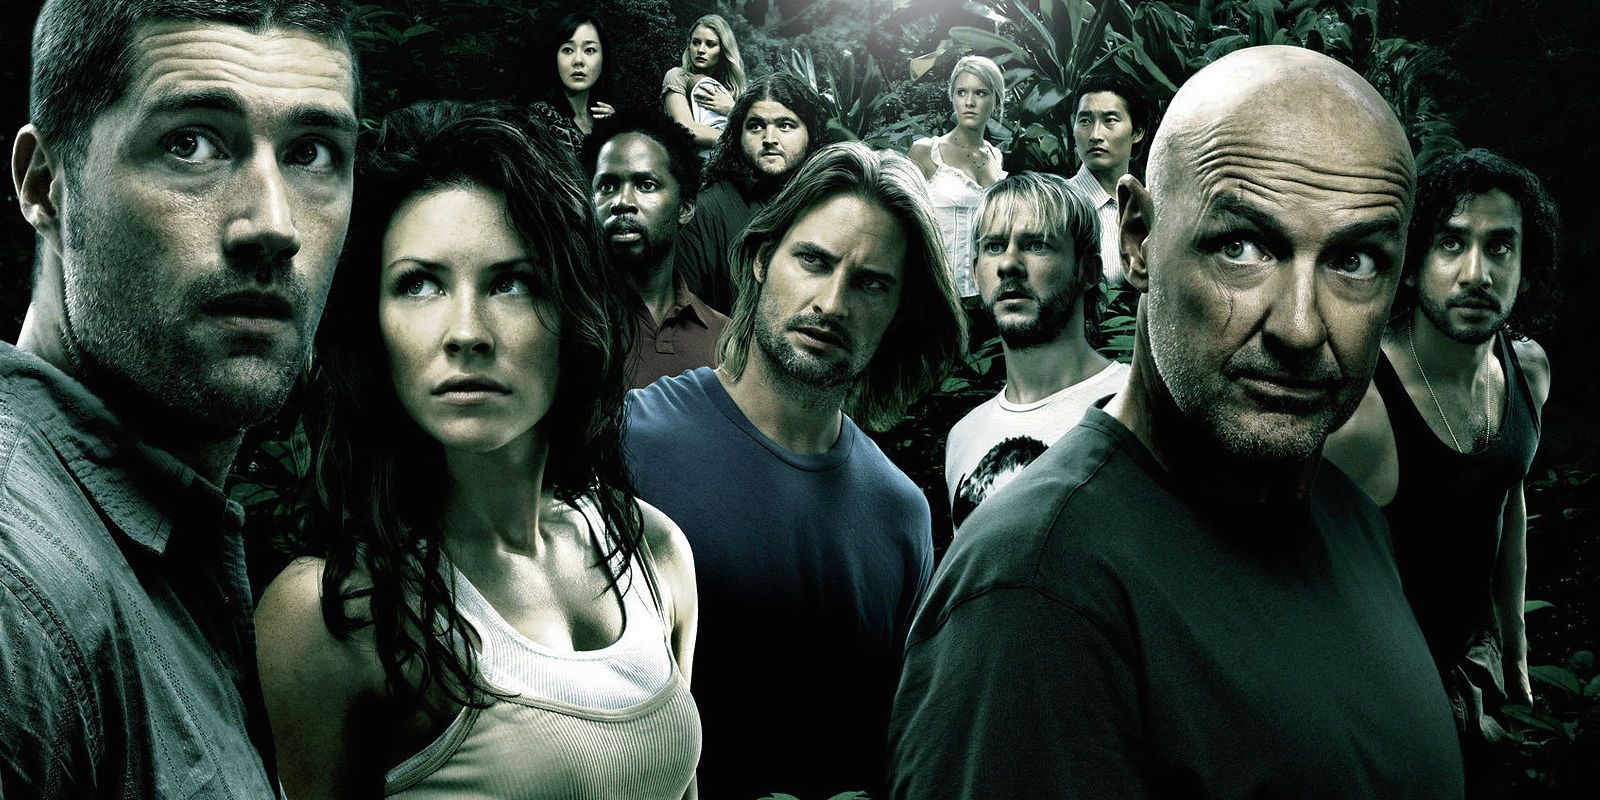 Lost: Exclusive Streaming Rights Picked Up By Hulu